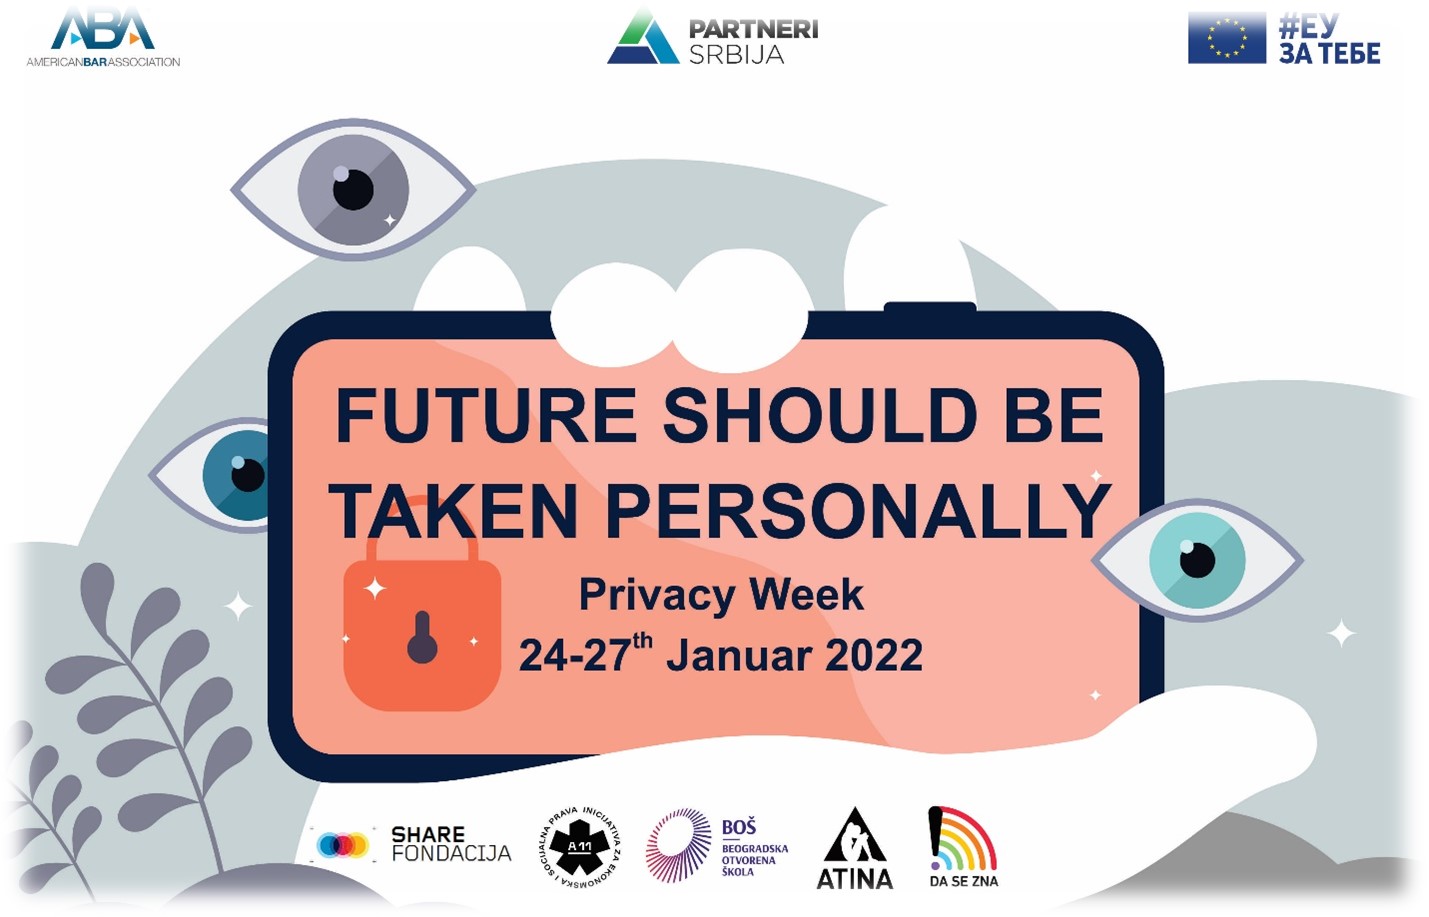 Invitation to Privacy Week, starting from January 24 to January 27, 2022